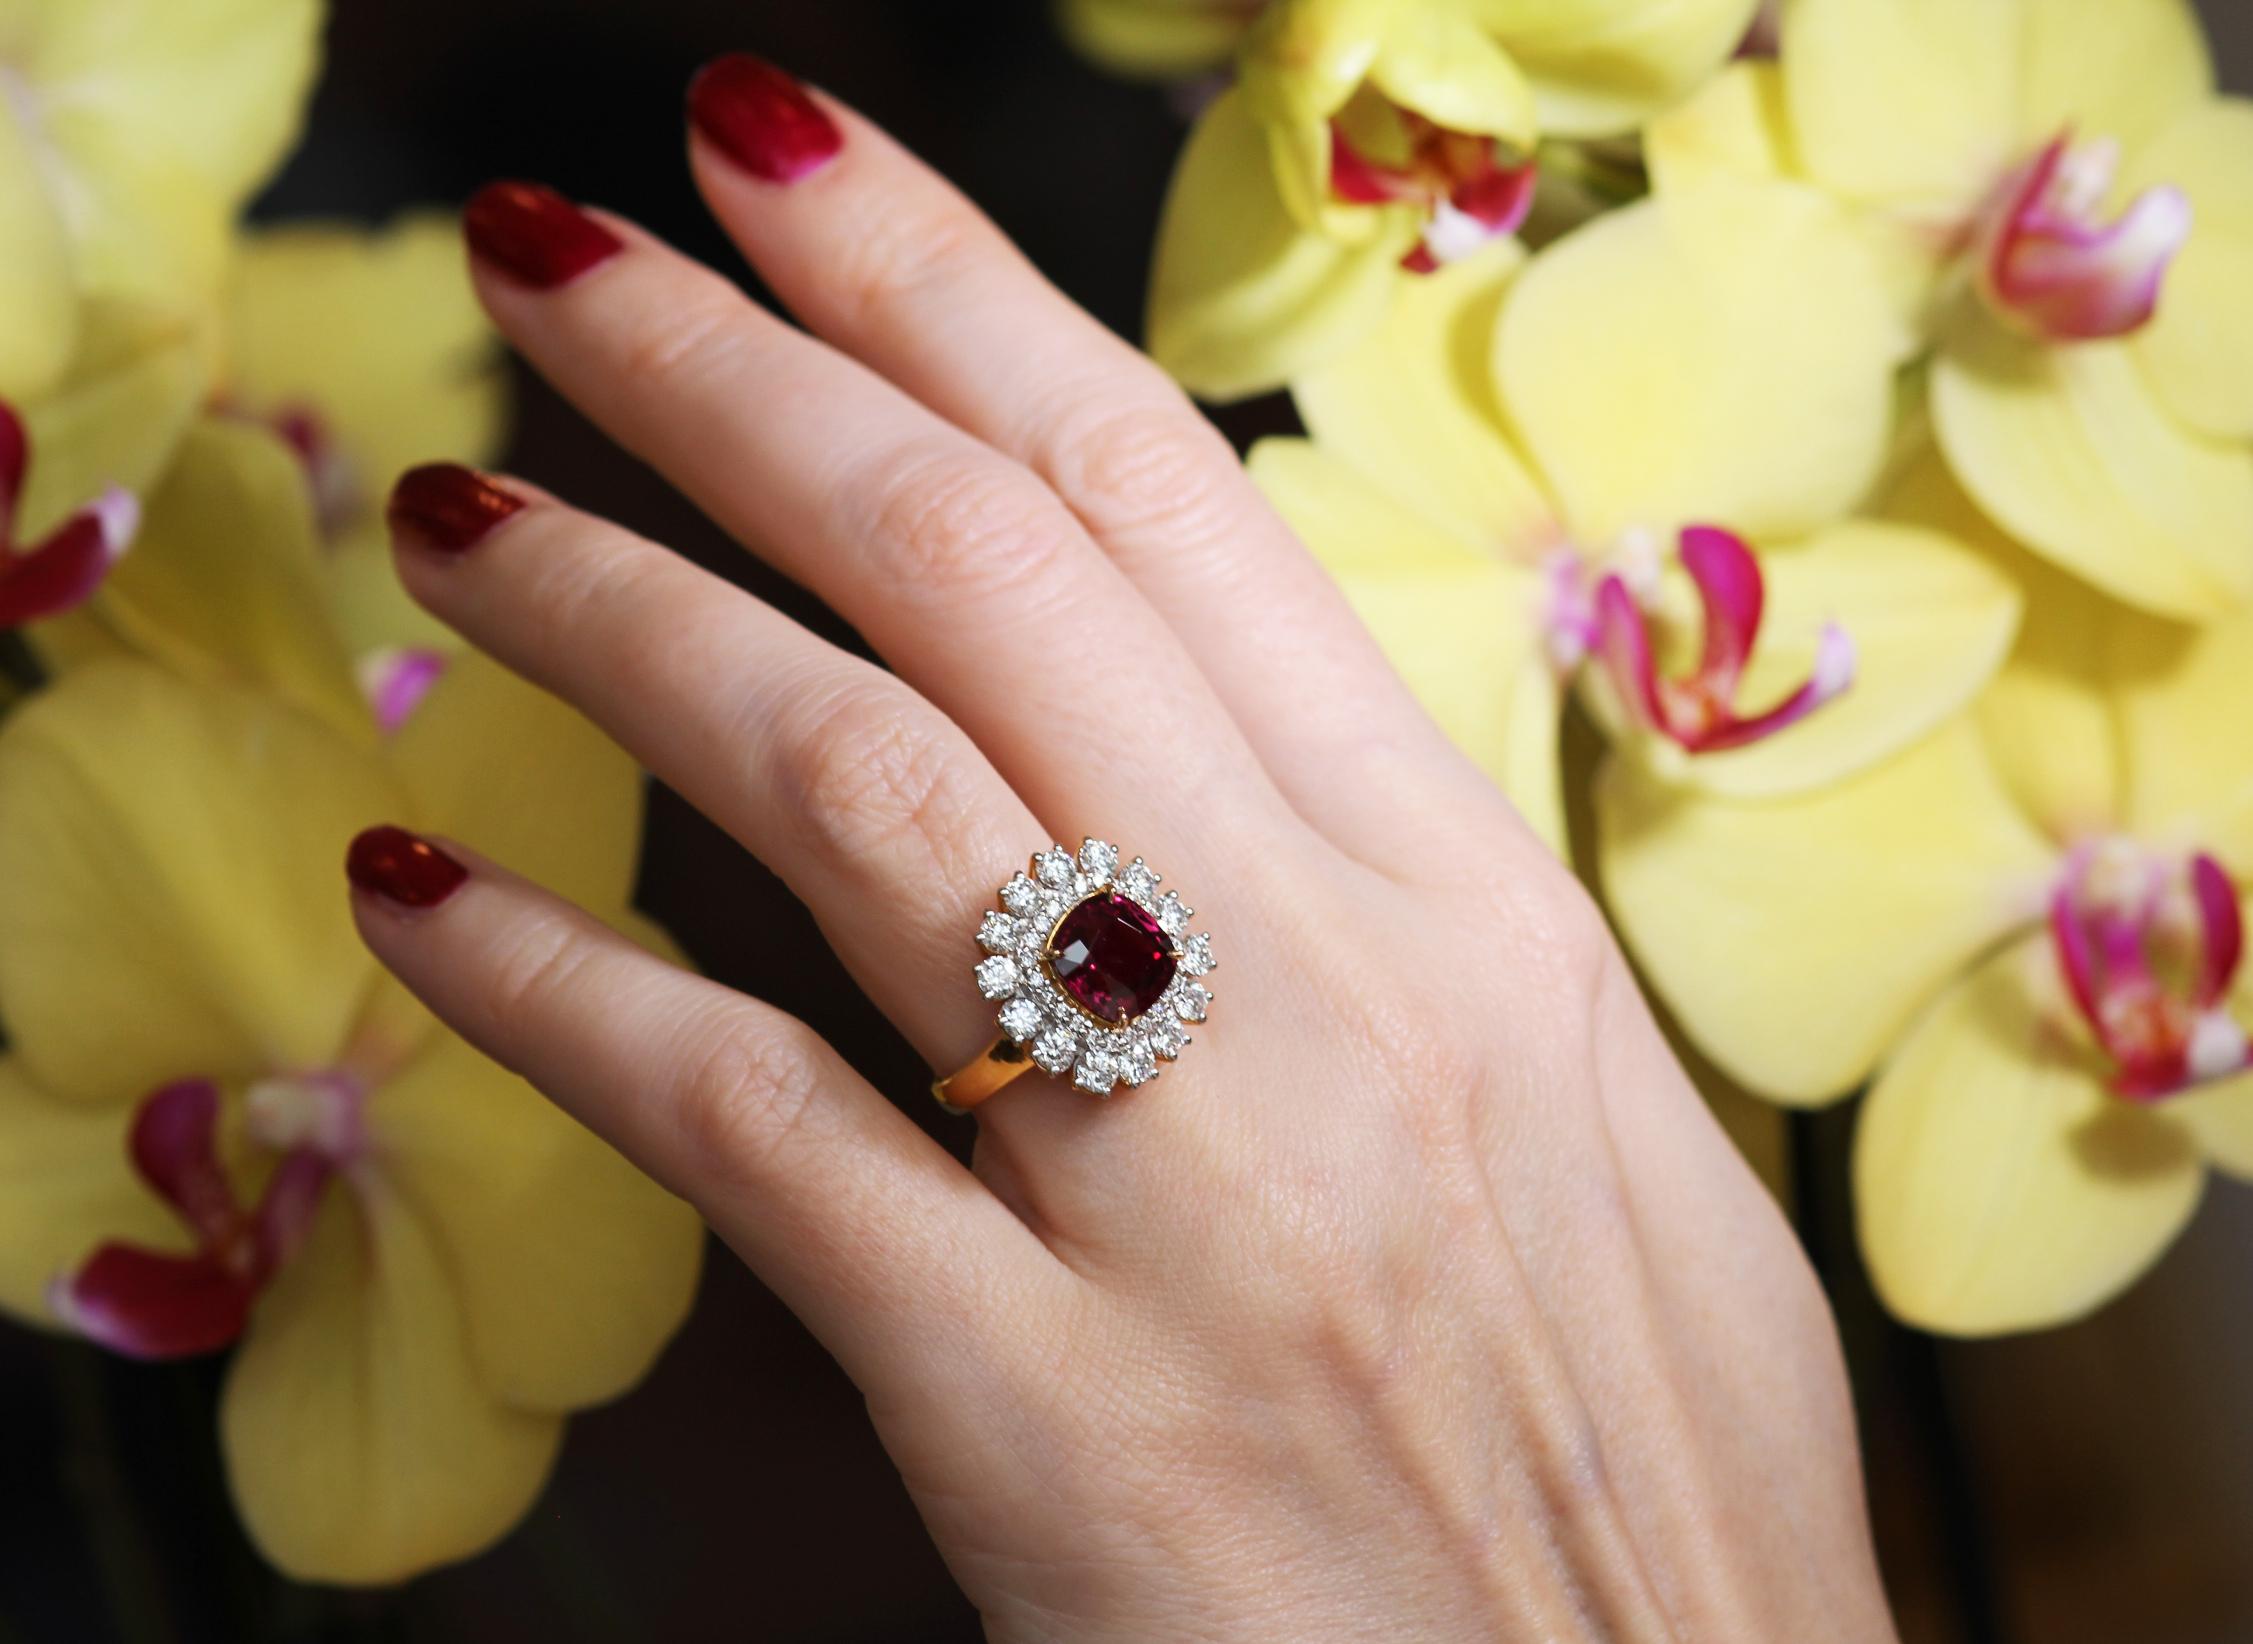 Striking, vibrant red natural 'no heat' Burma cushion cut ruby framed with a border of brilliant white round brilliant cut diamonds.

Certified by the world-famous SSEF laboratory in Switzerland, Natural Ruby, Origin - Myanmar

Ruby measurements: